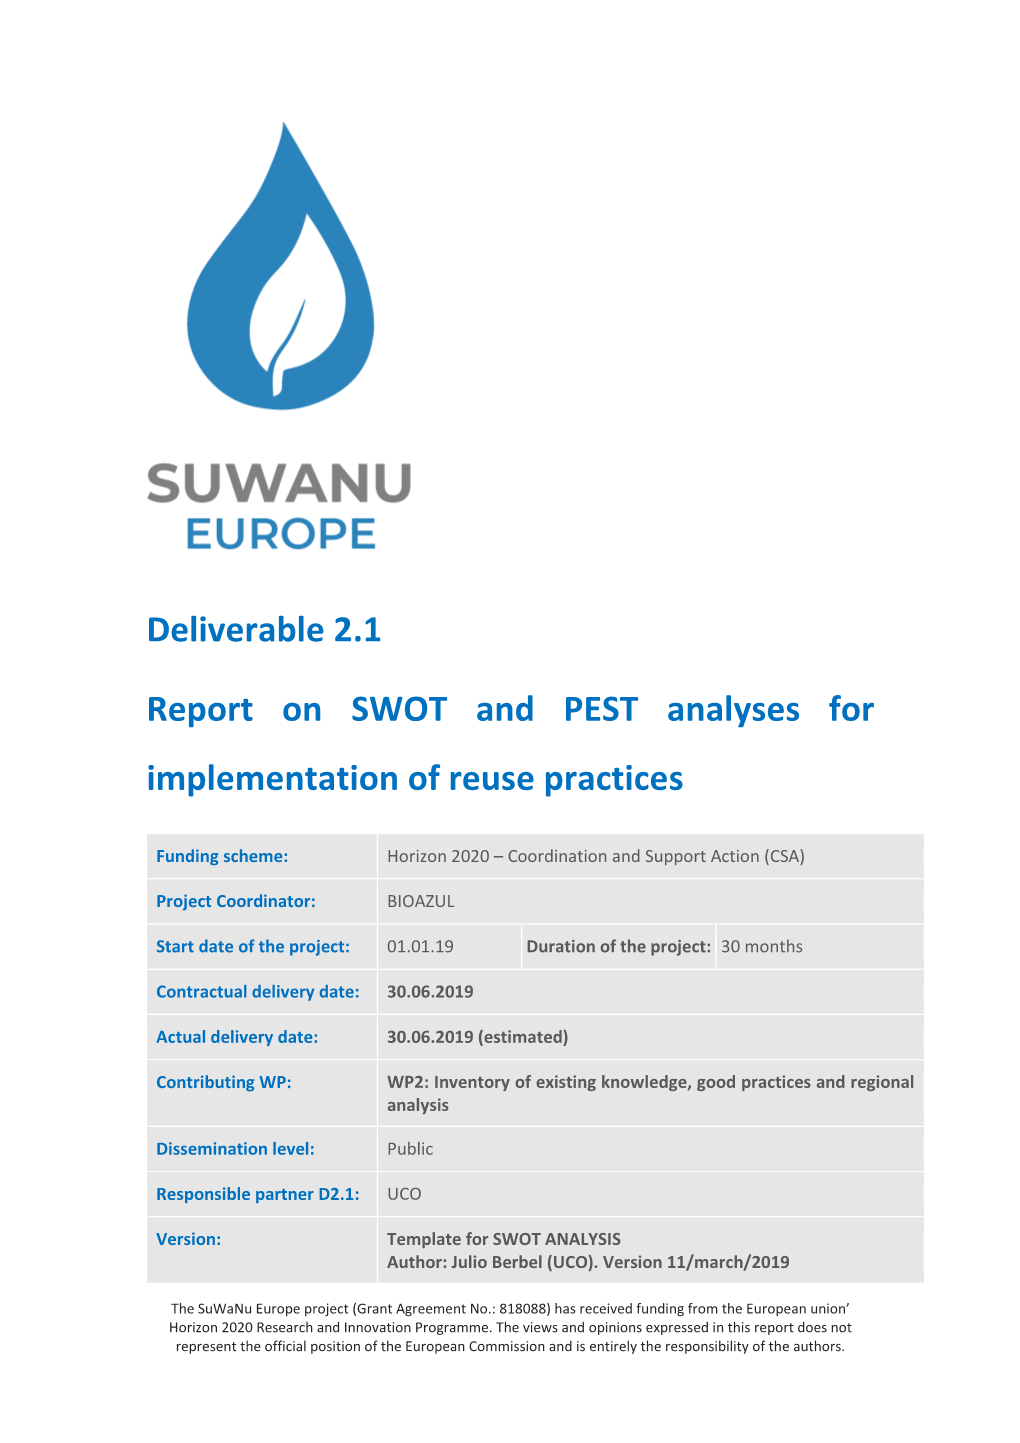 Deliverable 2.1 Report on SWOT and PEST Analyses for Implementation